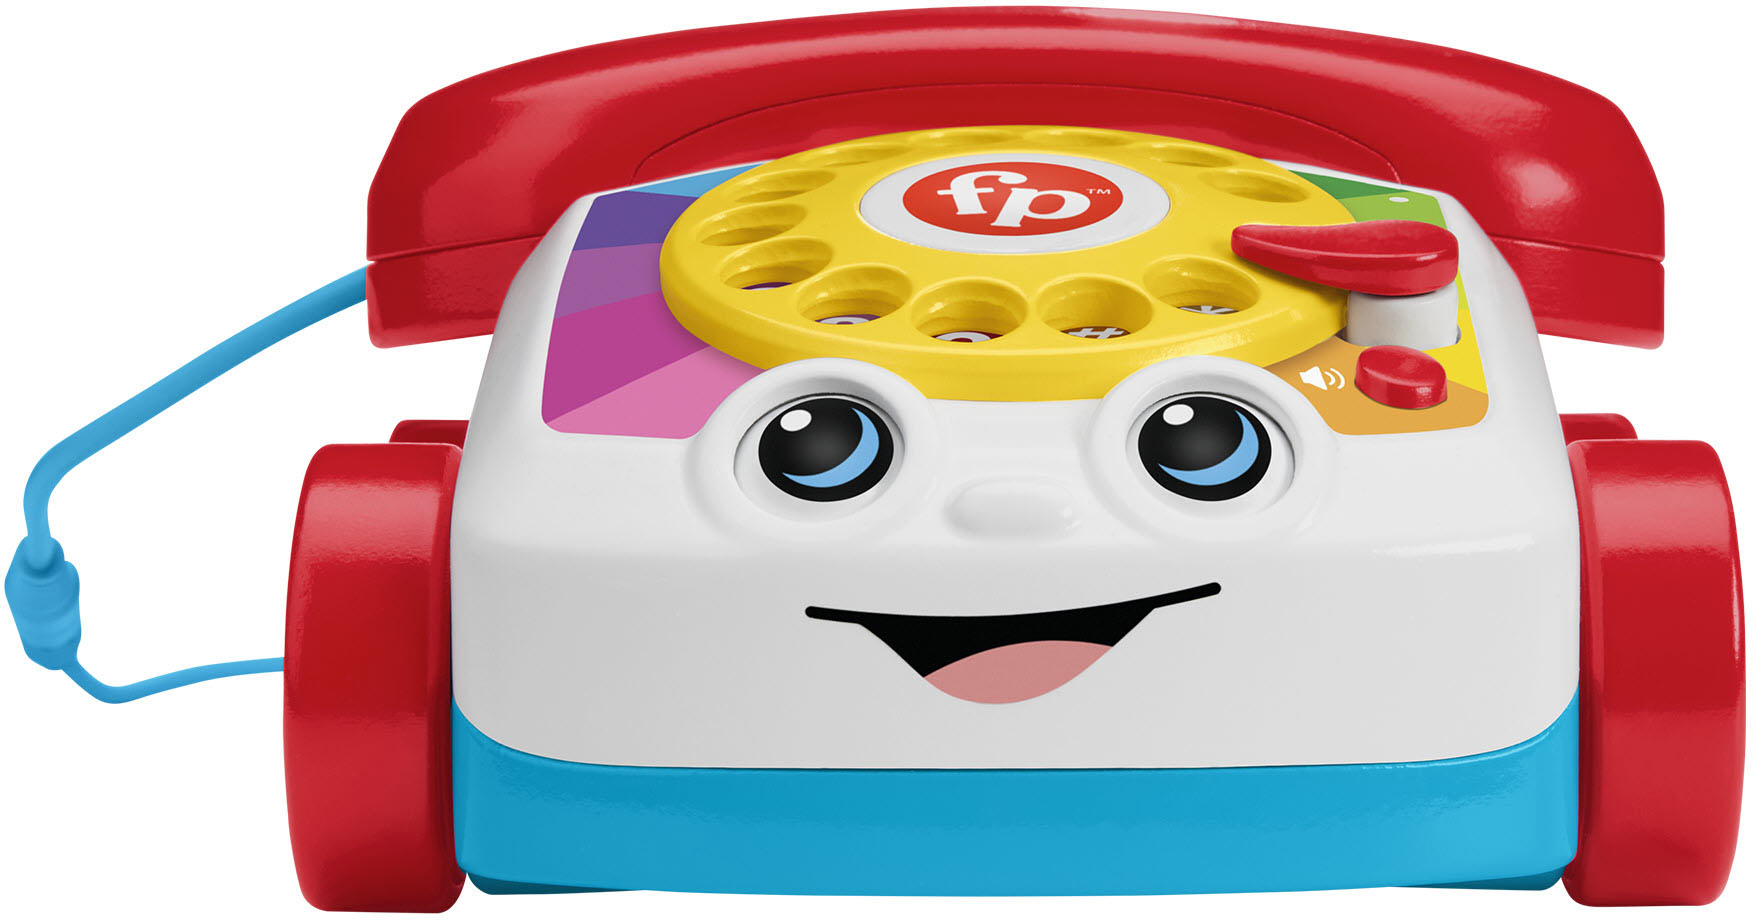 Fisher-Price Chatter Telephone with Bluetooth HGJ69 - Best Buy